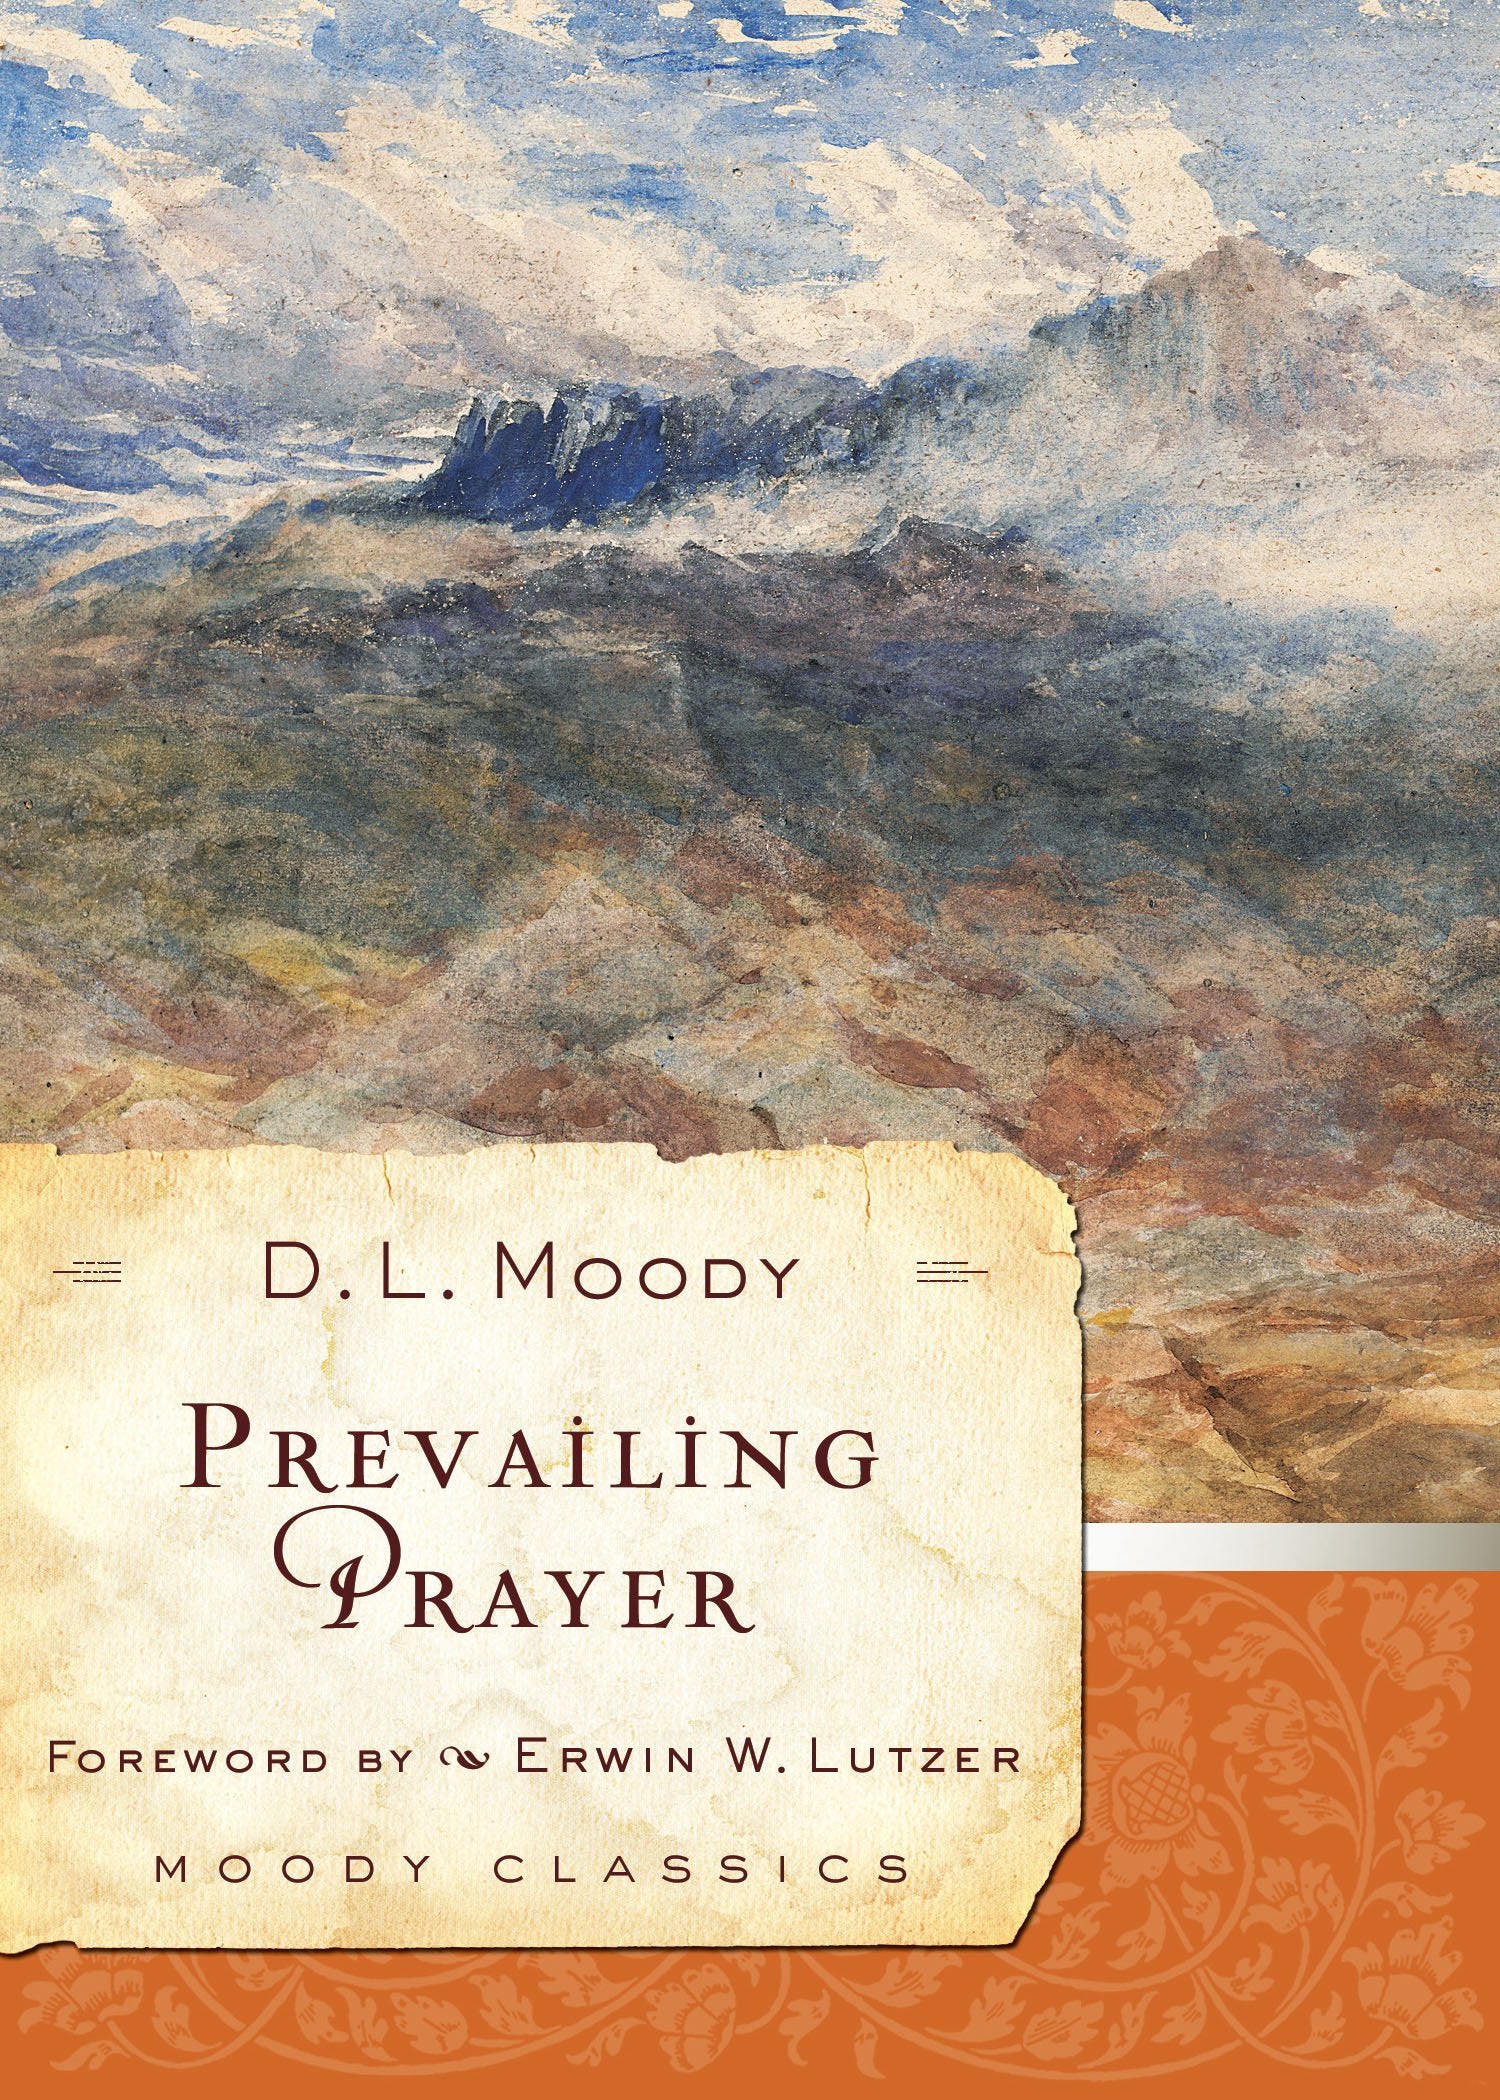 Prevailing Prayer by D.L. Moody